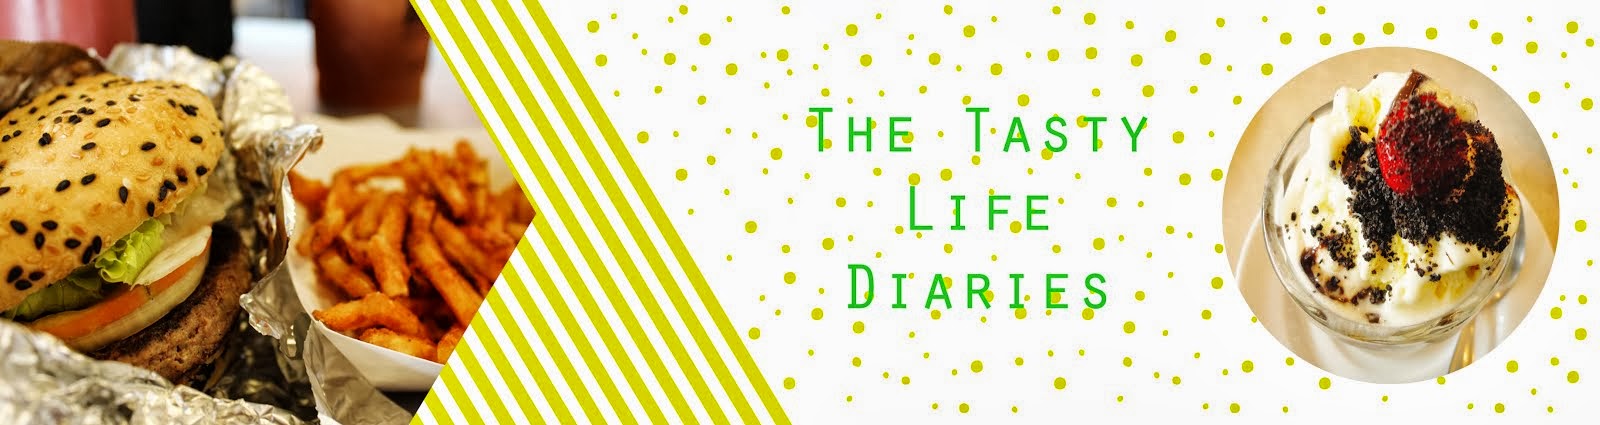 The Tasty Life Diaries